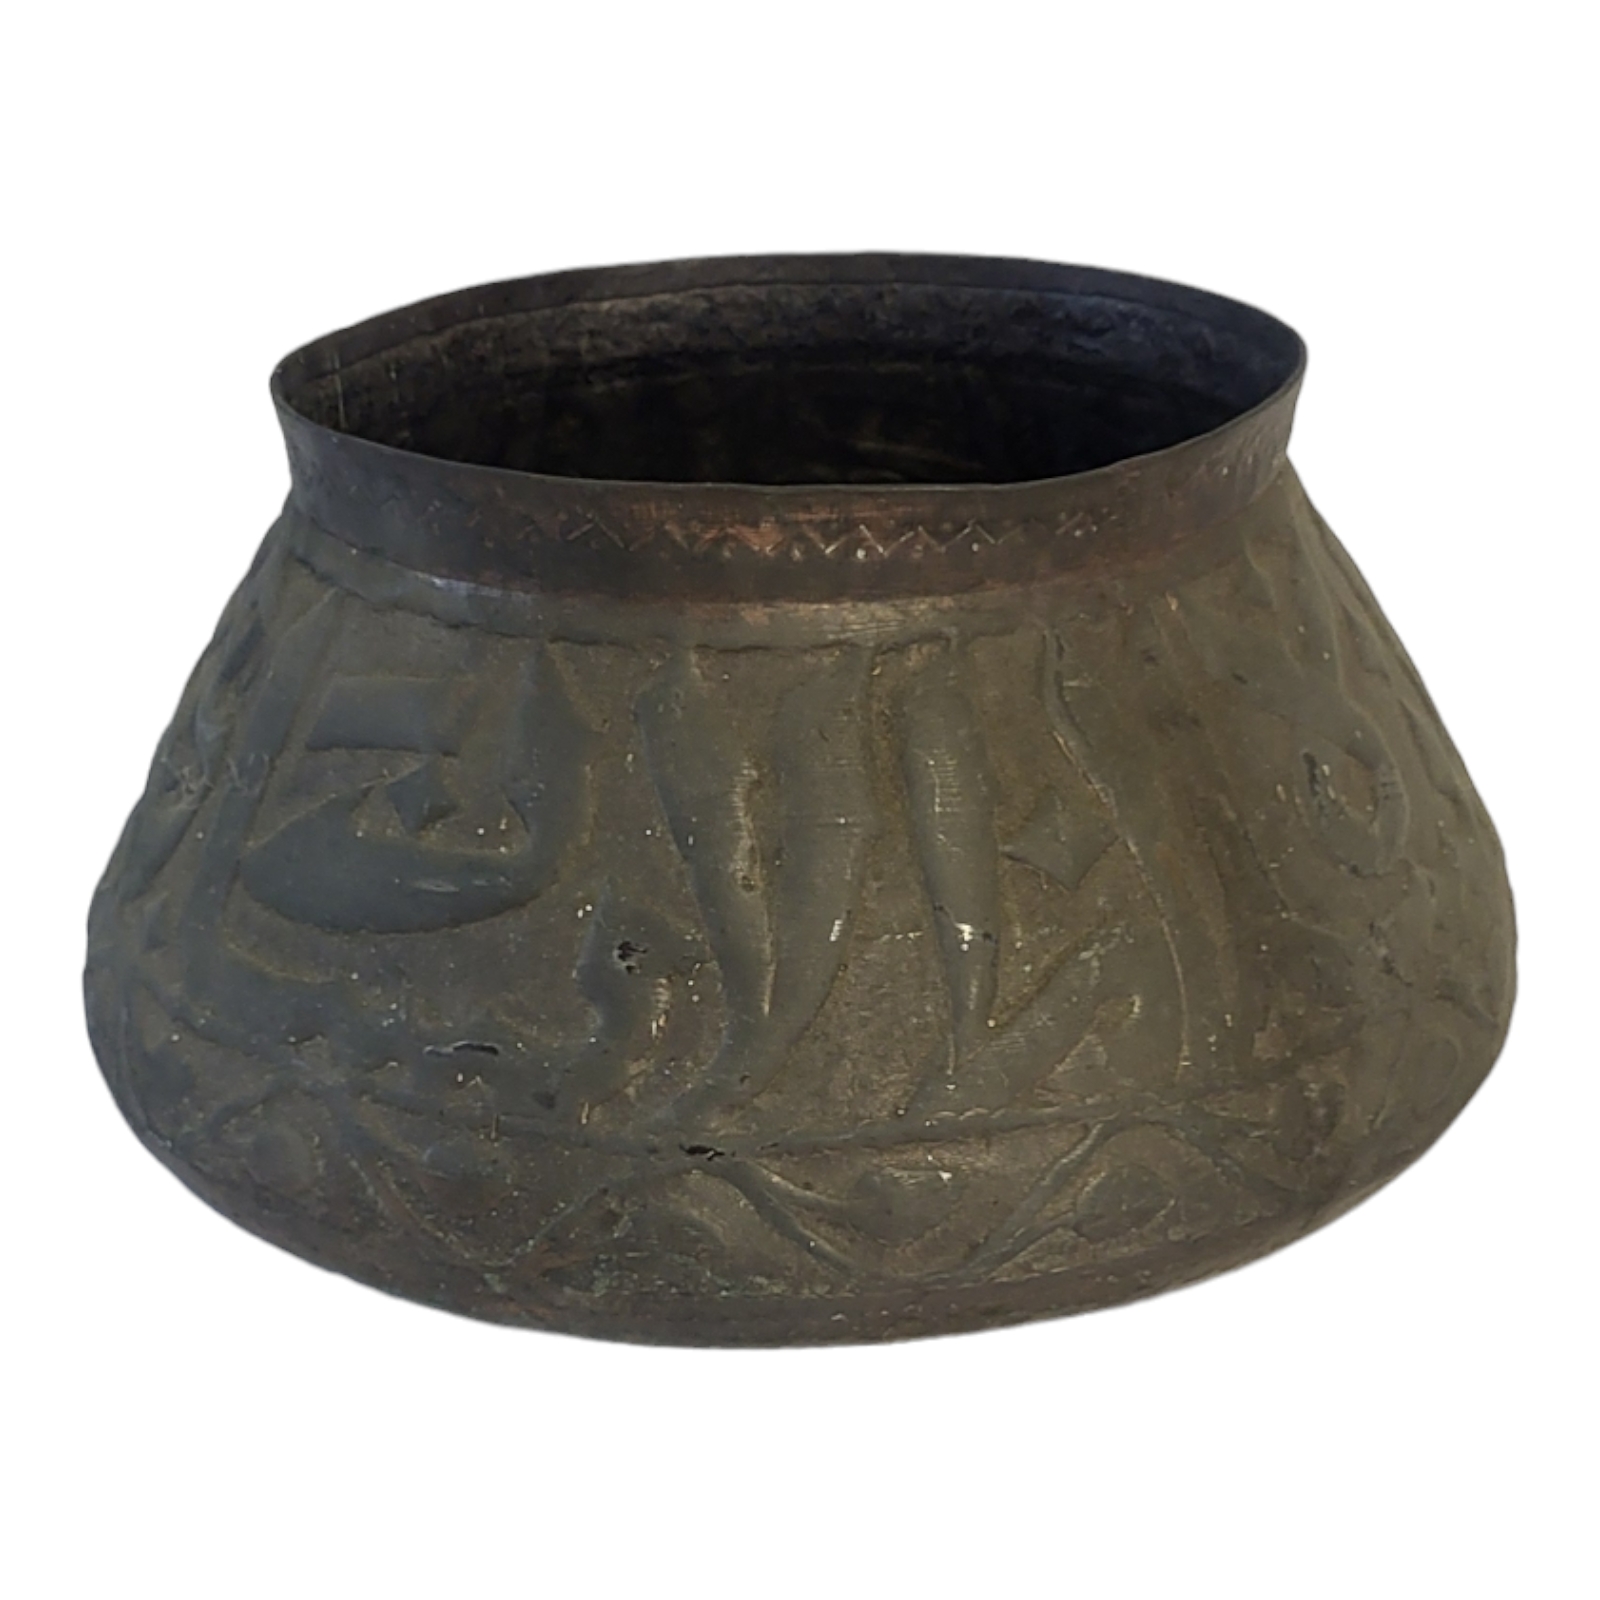 AN ANTIQUE PERSIAN SAFAVID TINNED COPPER BASIN BOWL Decorated in relief with a band of calligraphy - Image 2 of 3